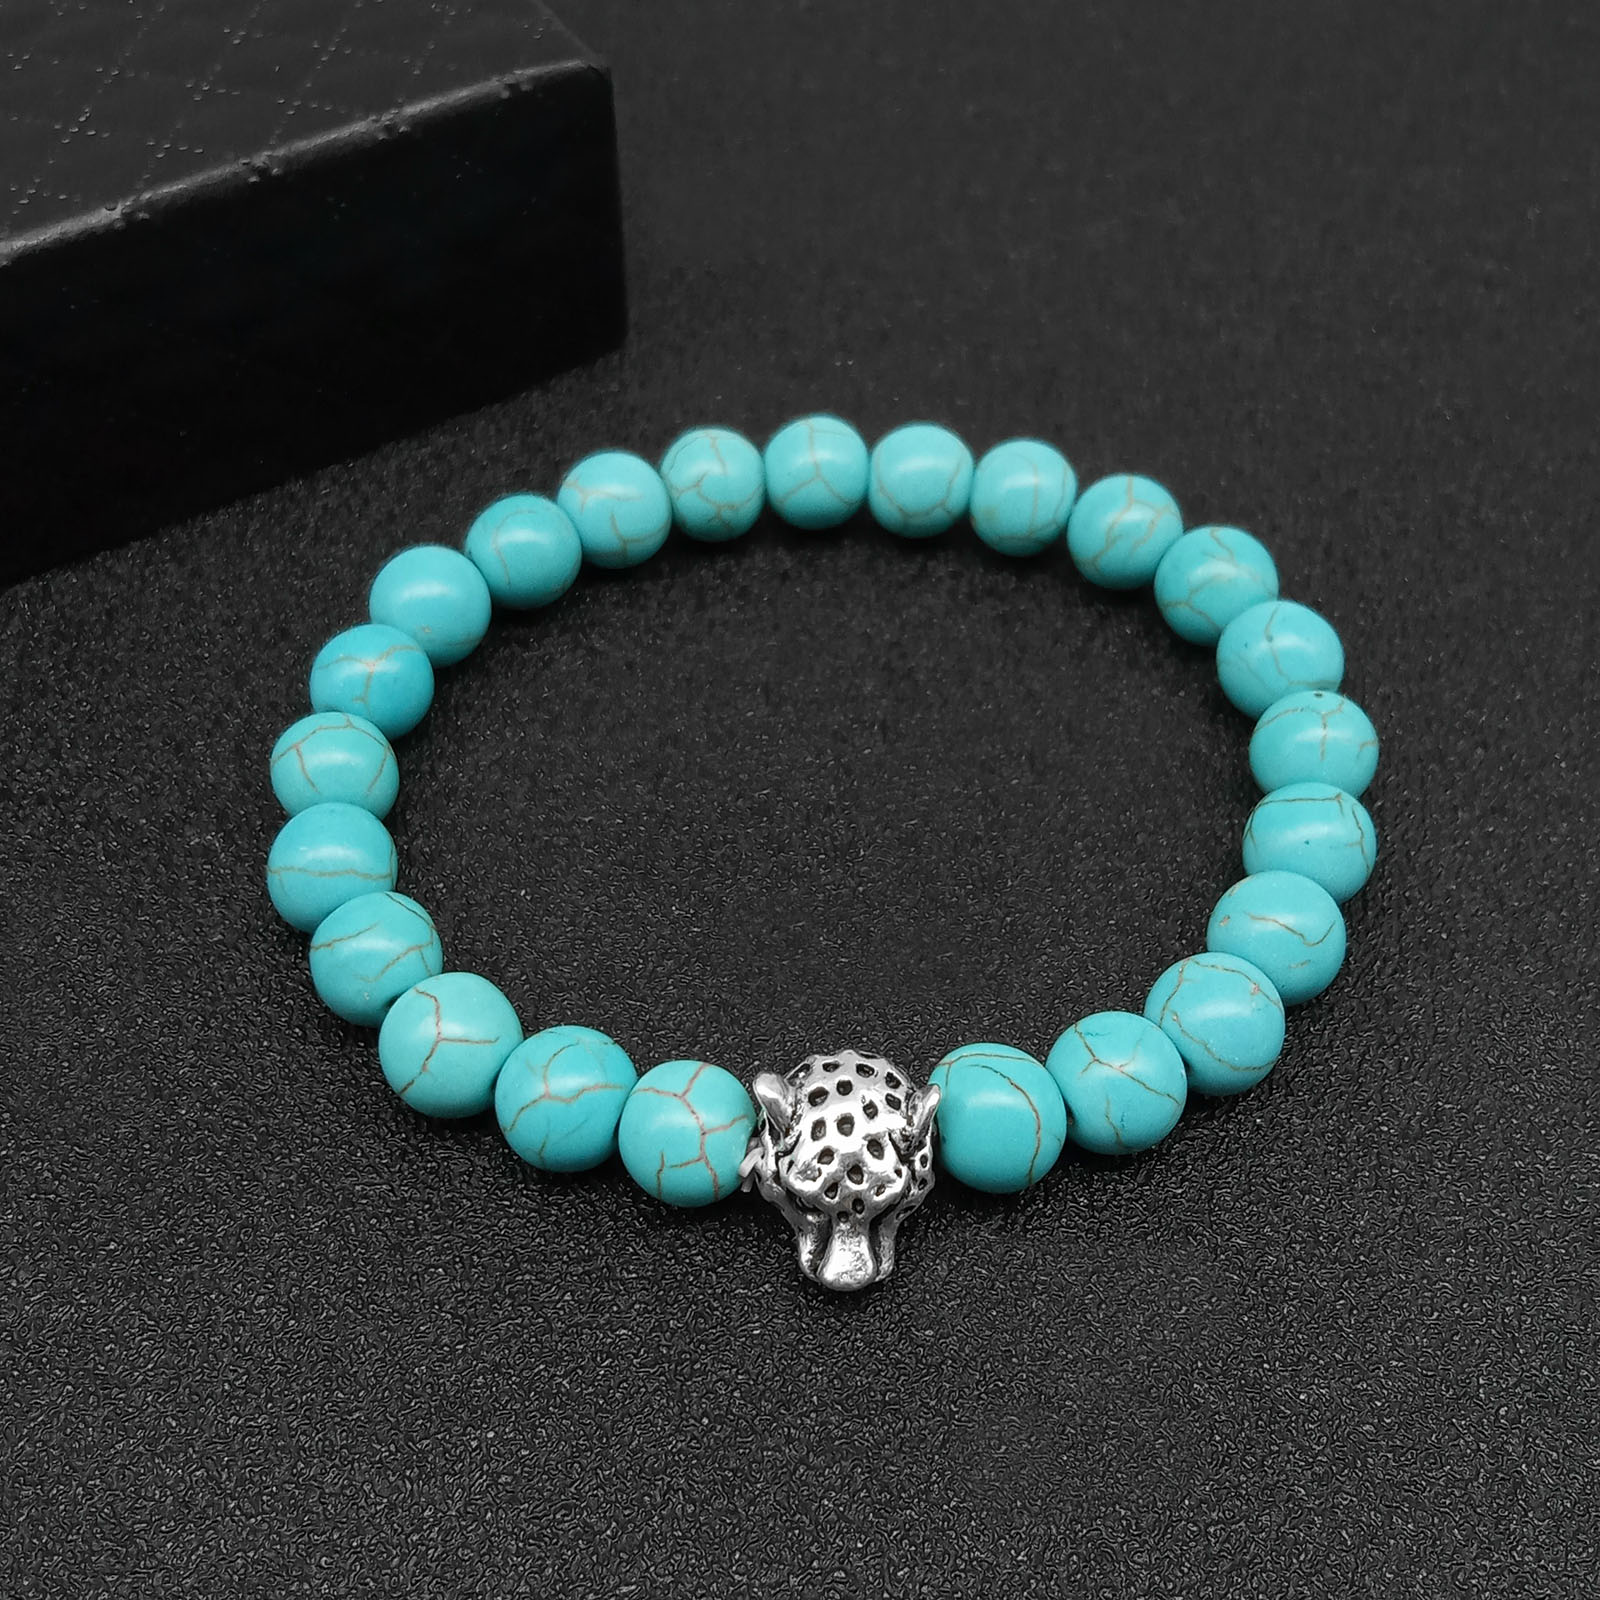 Leopard Head 2 - turquoise Hand String